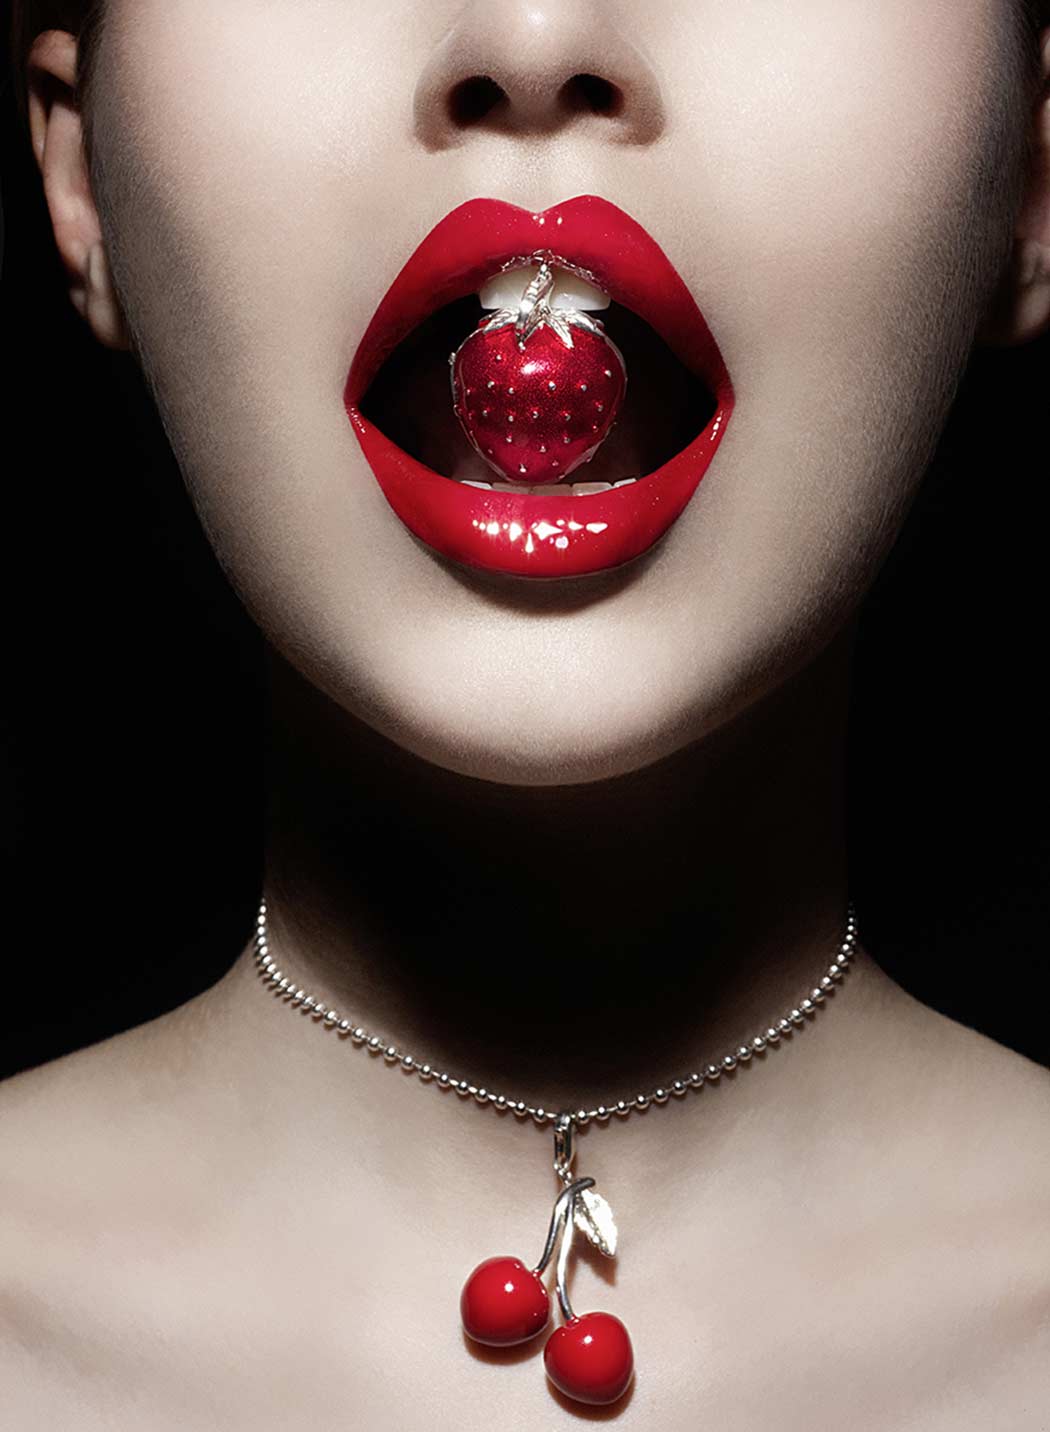 Fashion photography, red lips, jewellery,